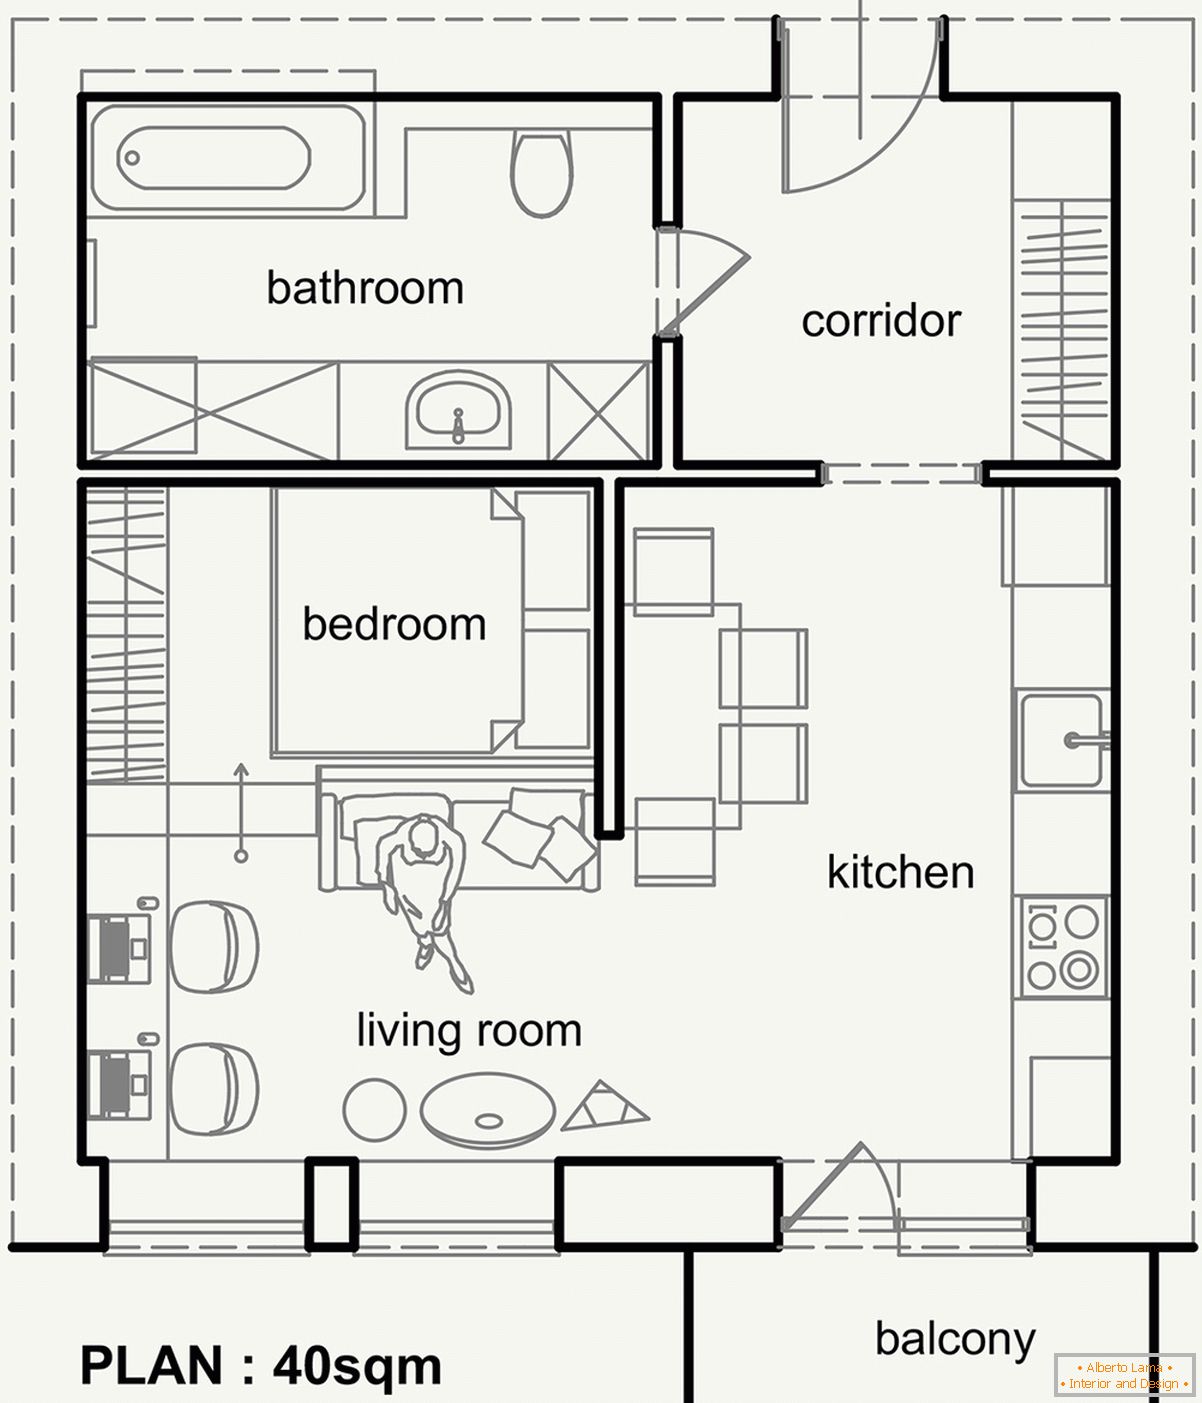 Layout of a small house with open plan